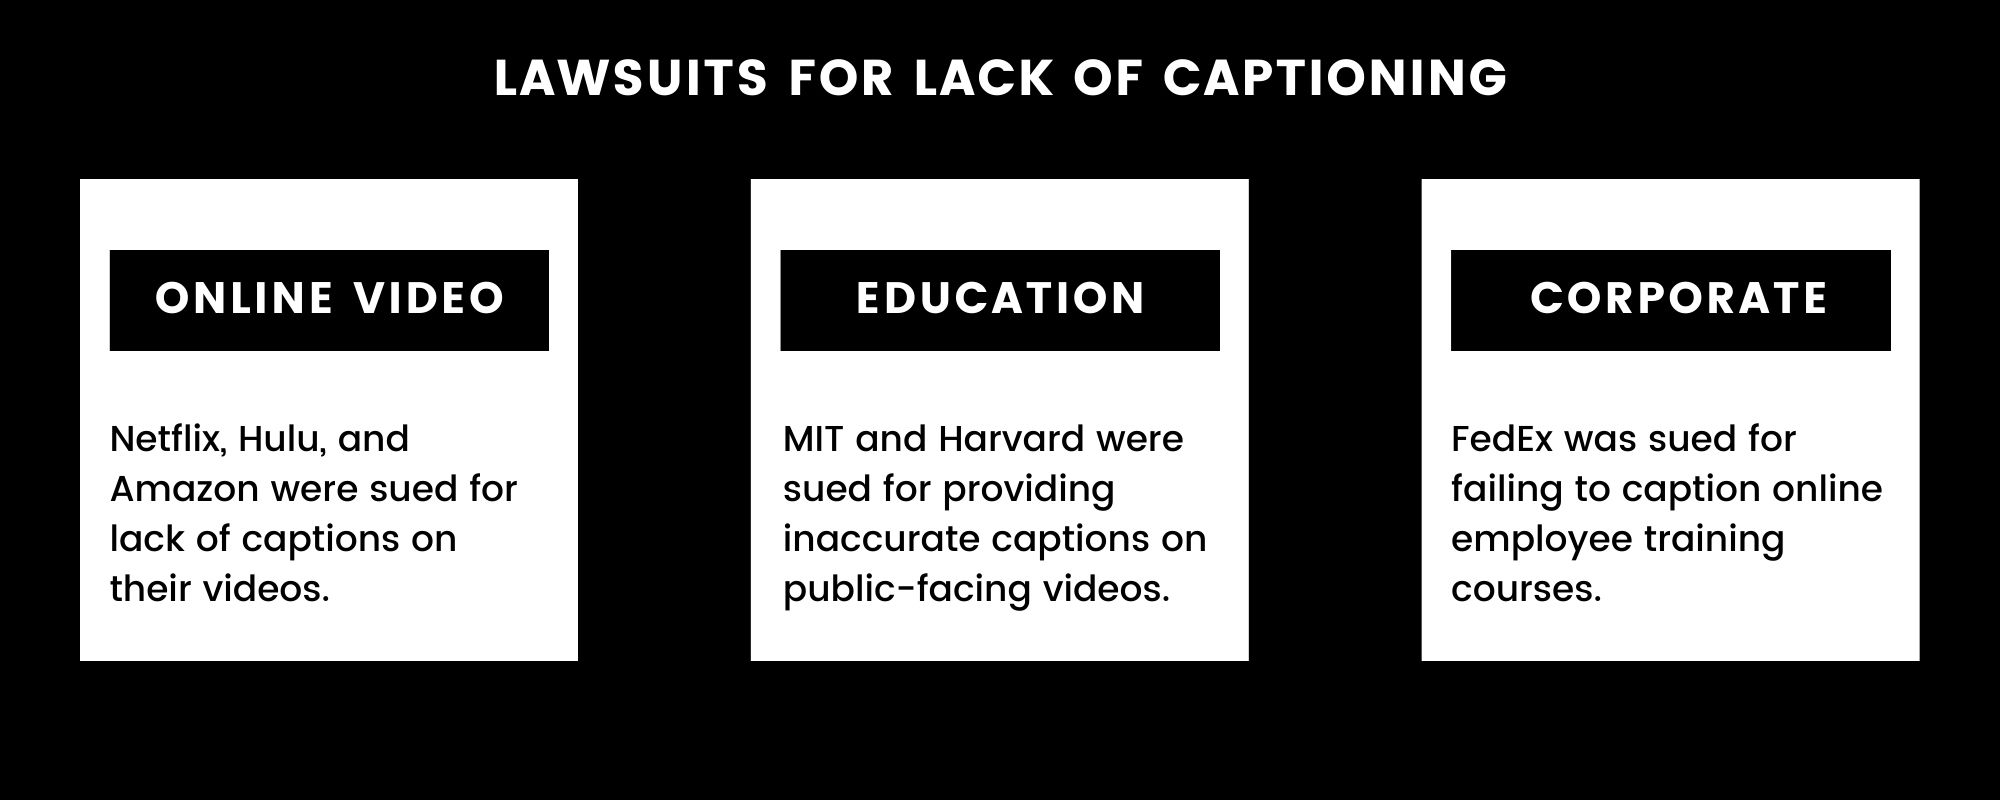 Lawsuits for lack of captioning. Online video: Netflix, Hulu, and Amazon were sued for lack of captions on their videos. Education: MIT and Harvard were sued for providing inaccurate captions on public-facing videos. Corporate: FedEx was sued for failing to caption online employee training courses. 